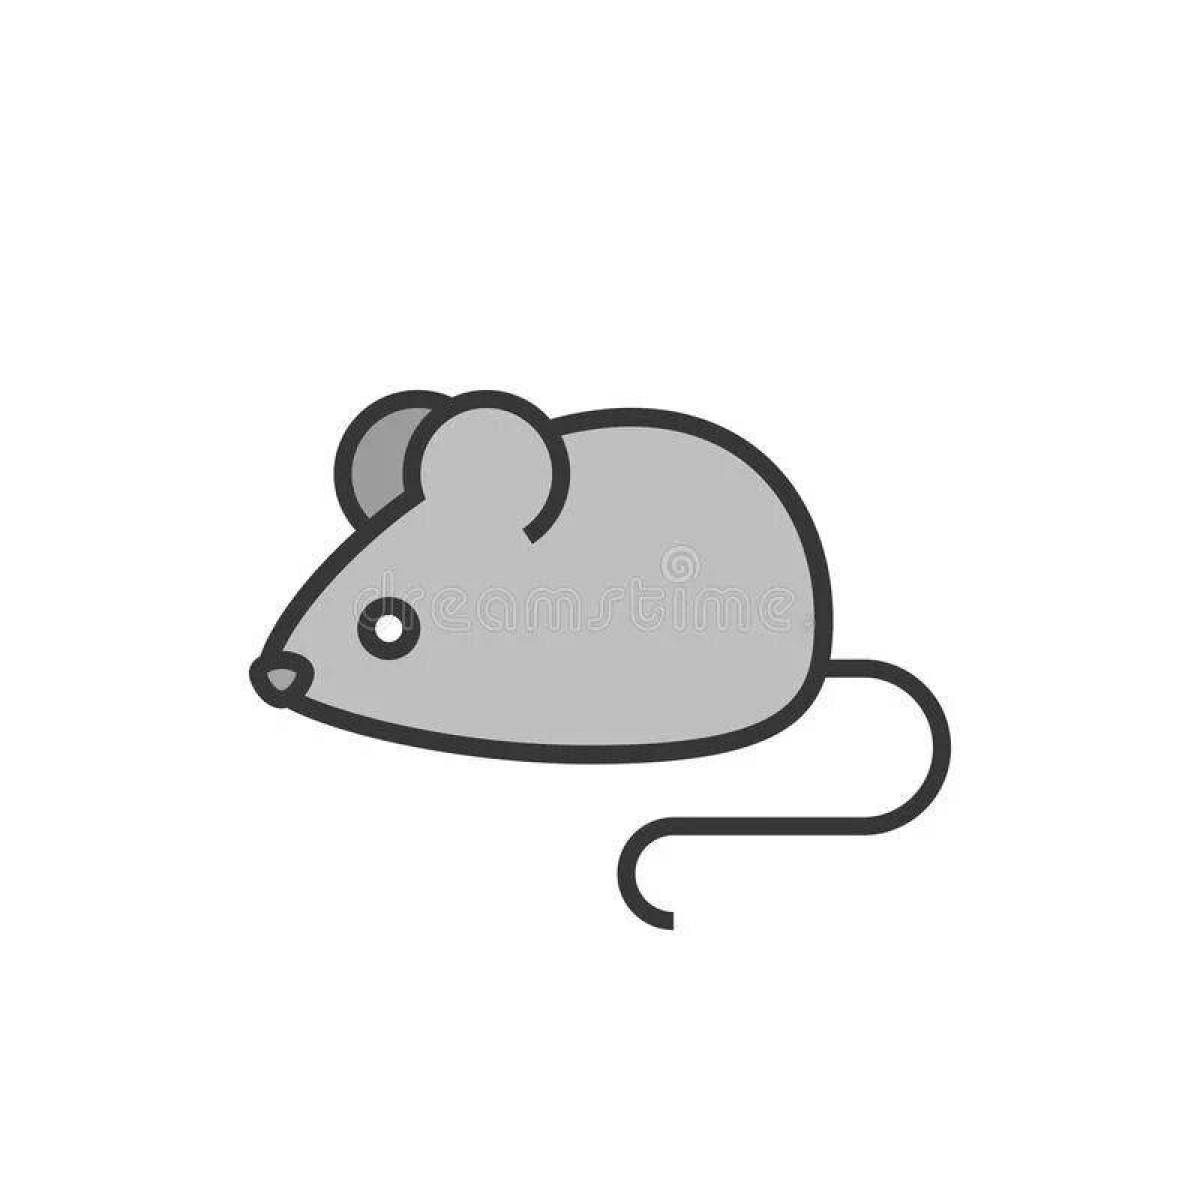 Delightful mouse sausage coloring page